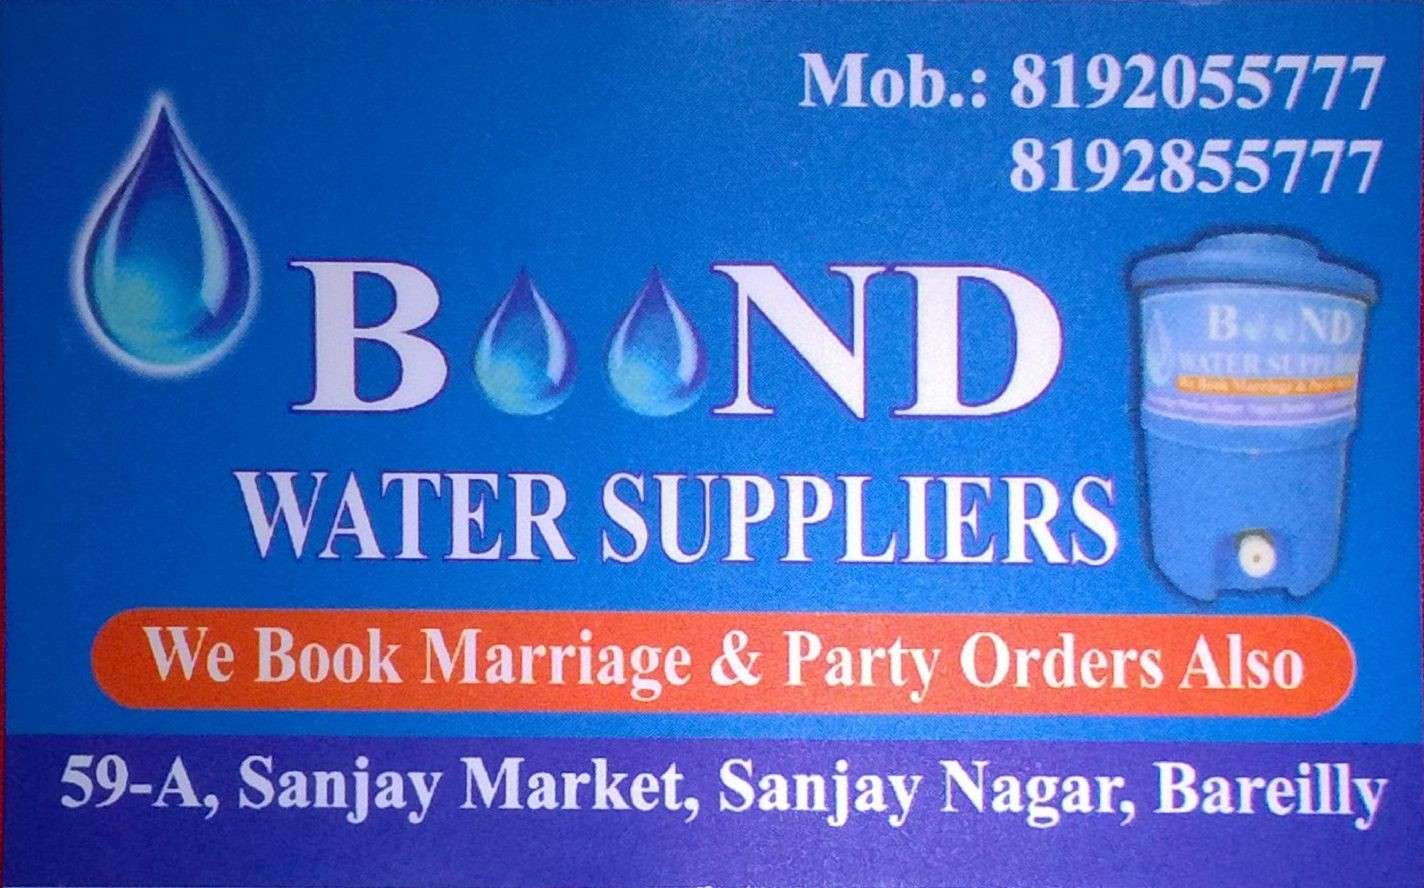 Boond Water Suppliers